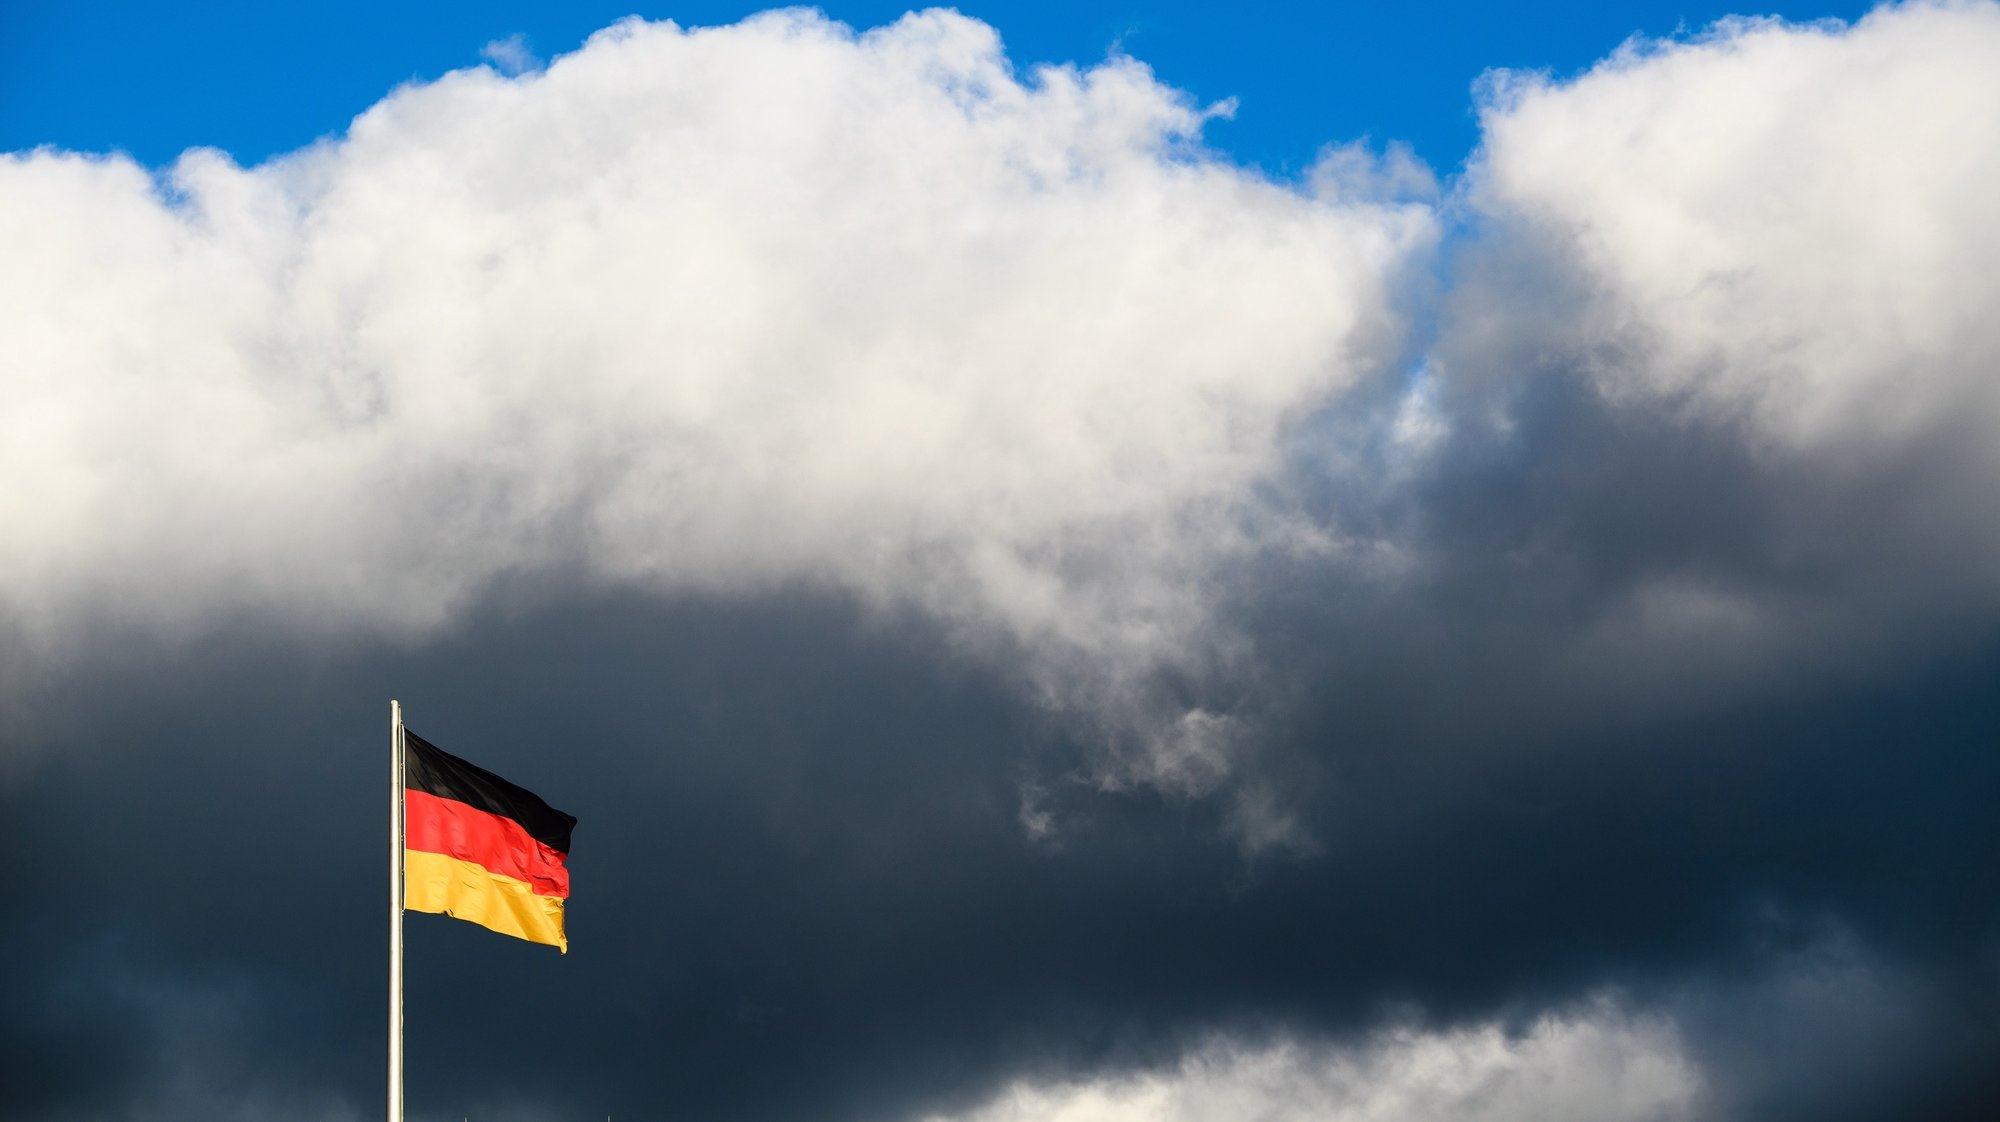 epa09078555 Clouds are seen over a German national flag at the Reichstag building, the seat of the German parliament, in Berlin, Germany, 16 March 2021.  EPA/CLEMENS BILAN